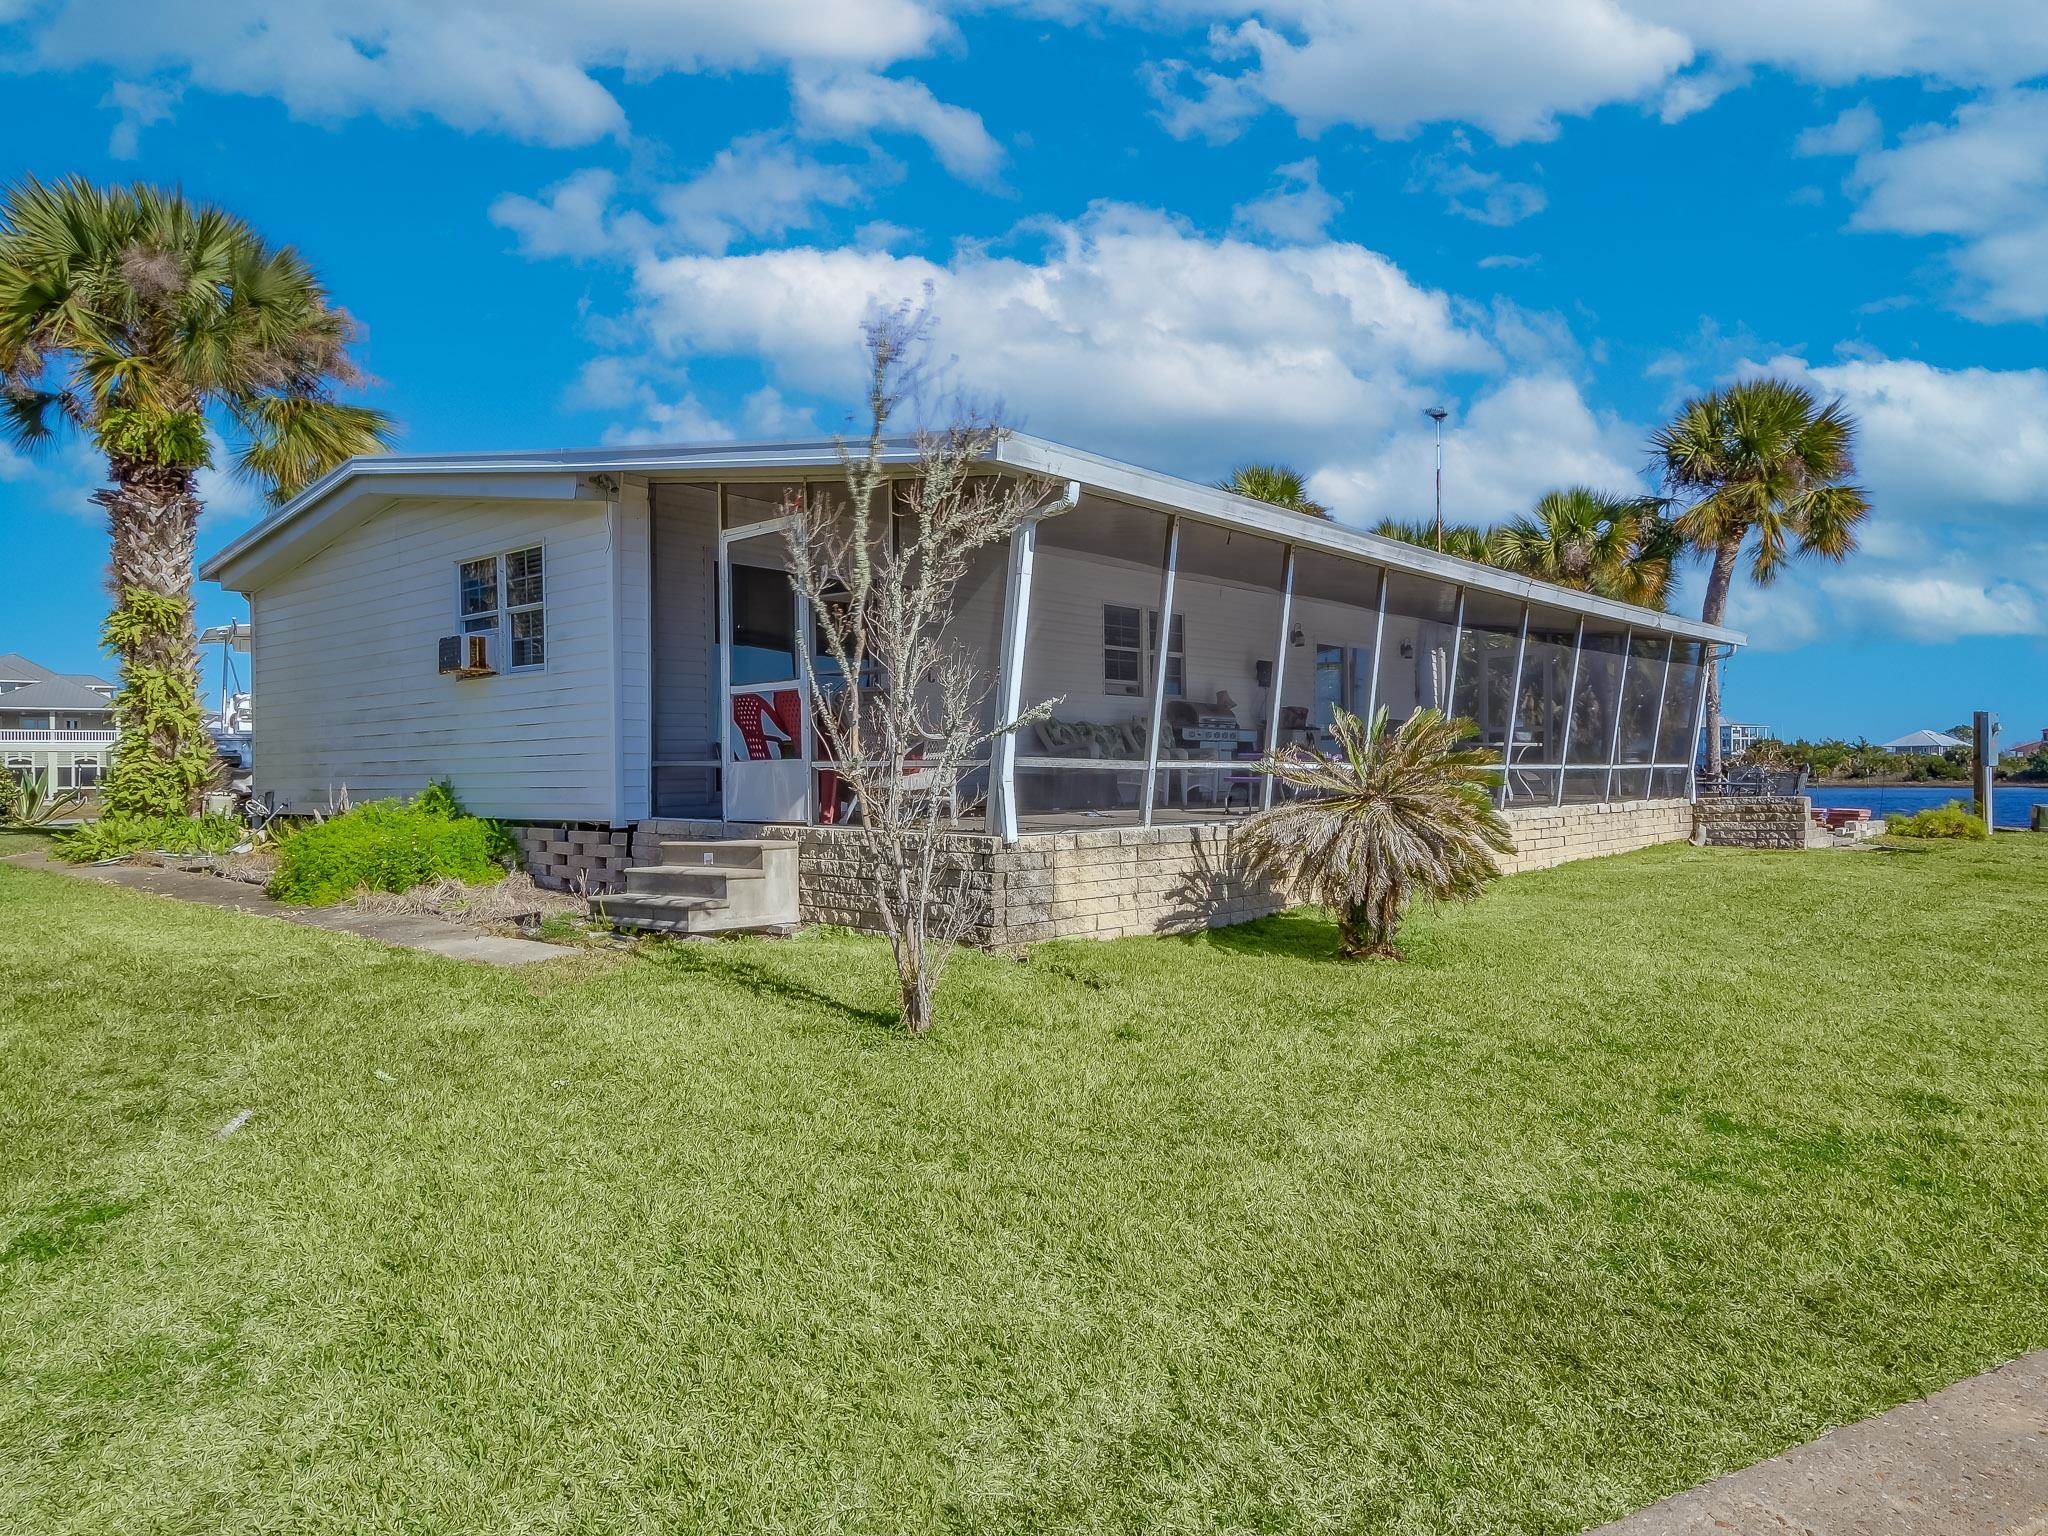 71 CONNIE Drive,CRAWFORDVILLE,Florida 32327,3 Bedrooms Bedrooms,2 BathroomsBathrooms,Manuf/mobile home,71 CONNIE Drive,367168